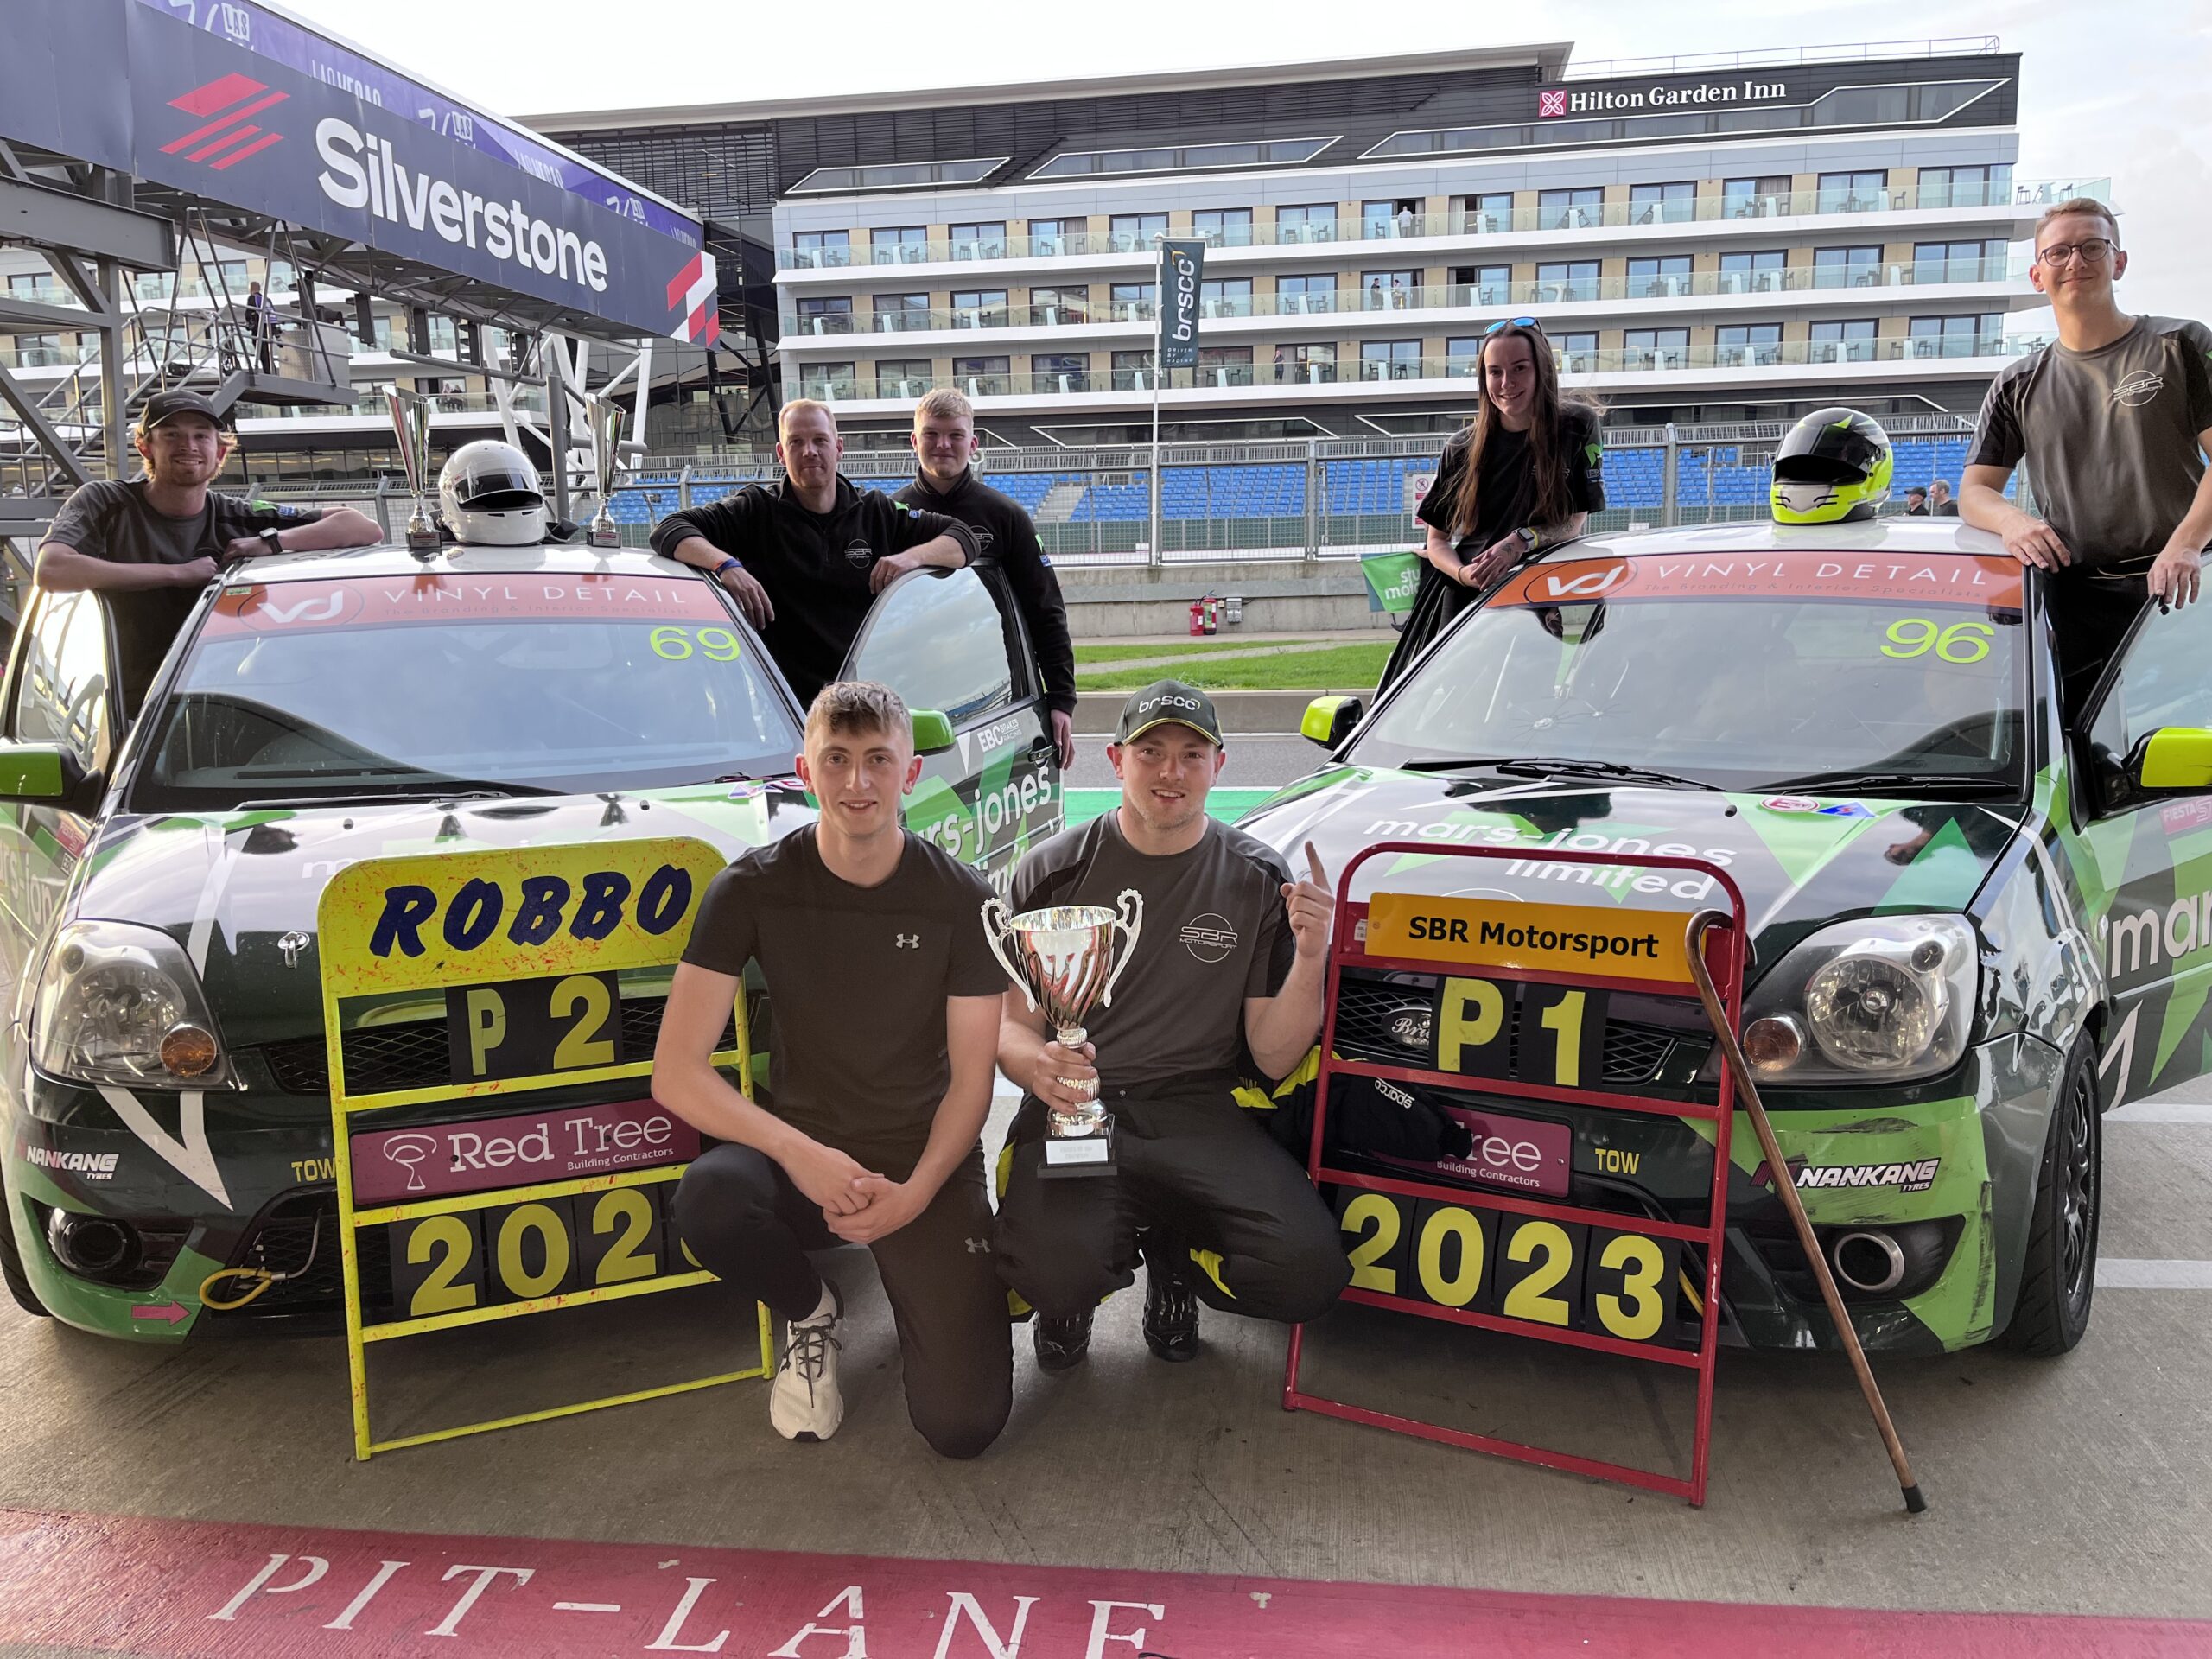 EBC-Equipped Race Team Secure 1-2 Victory in 2023 Fiesta ST150 Championship